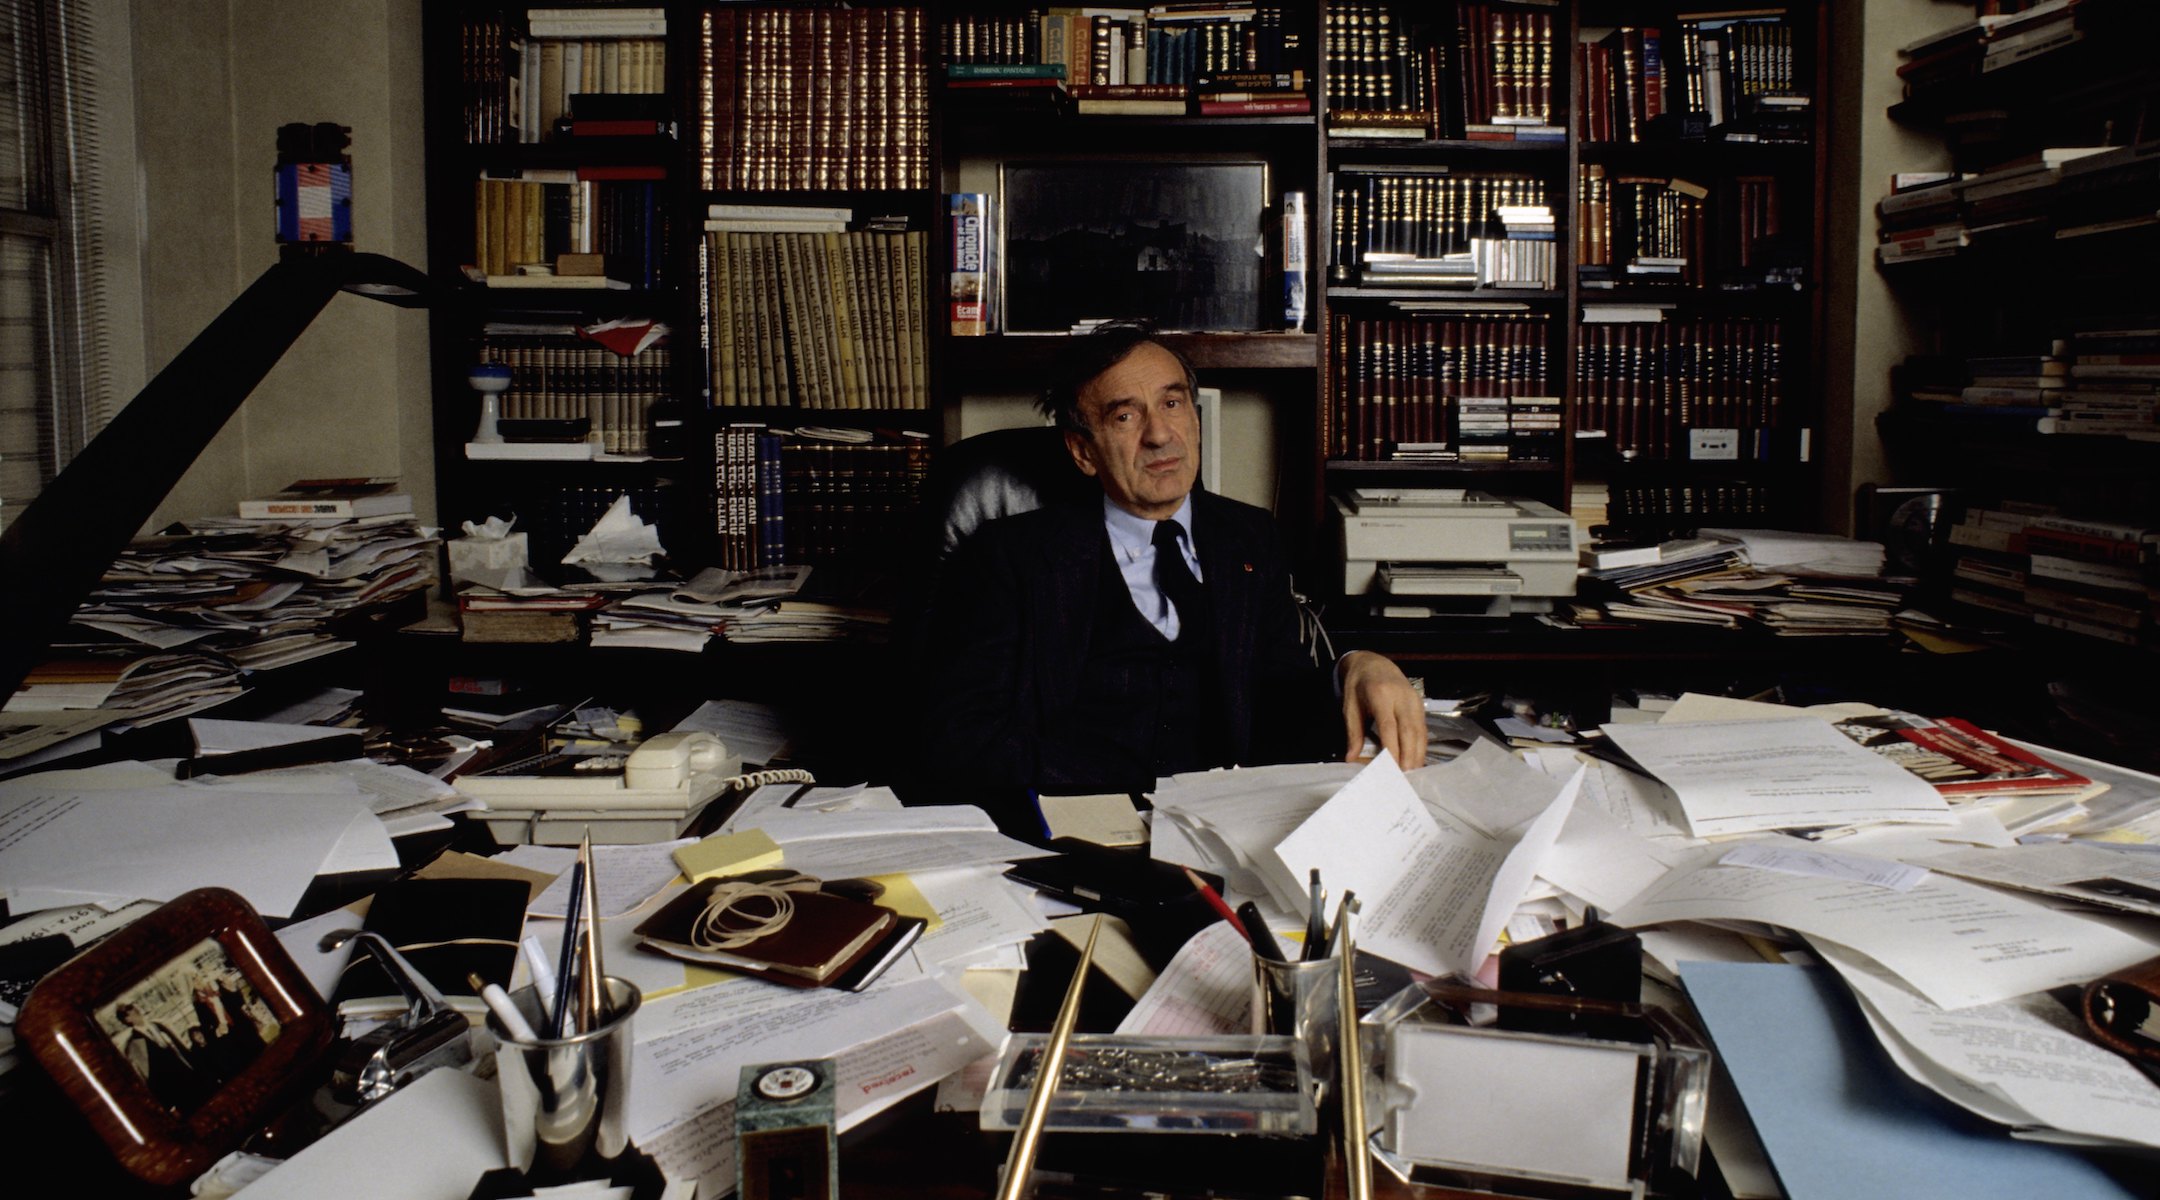 The author and Holocaust survivor Elie Wiesel in his office in 1980, surrounded by books and papers